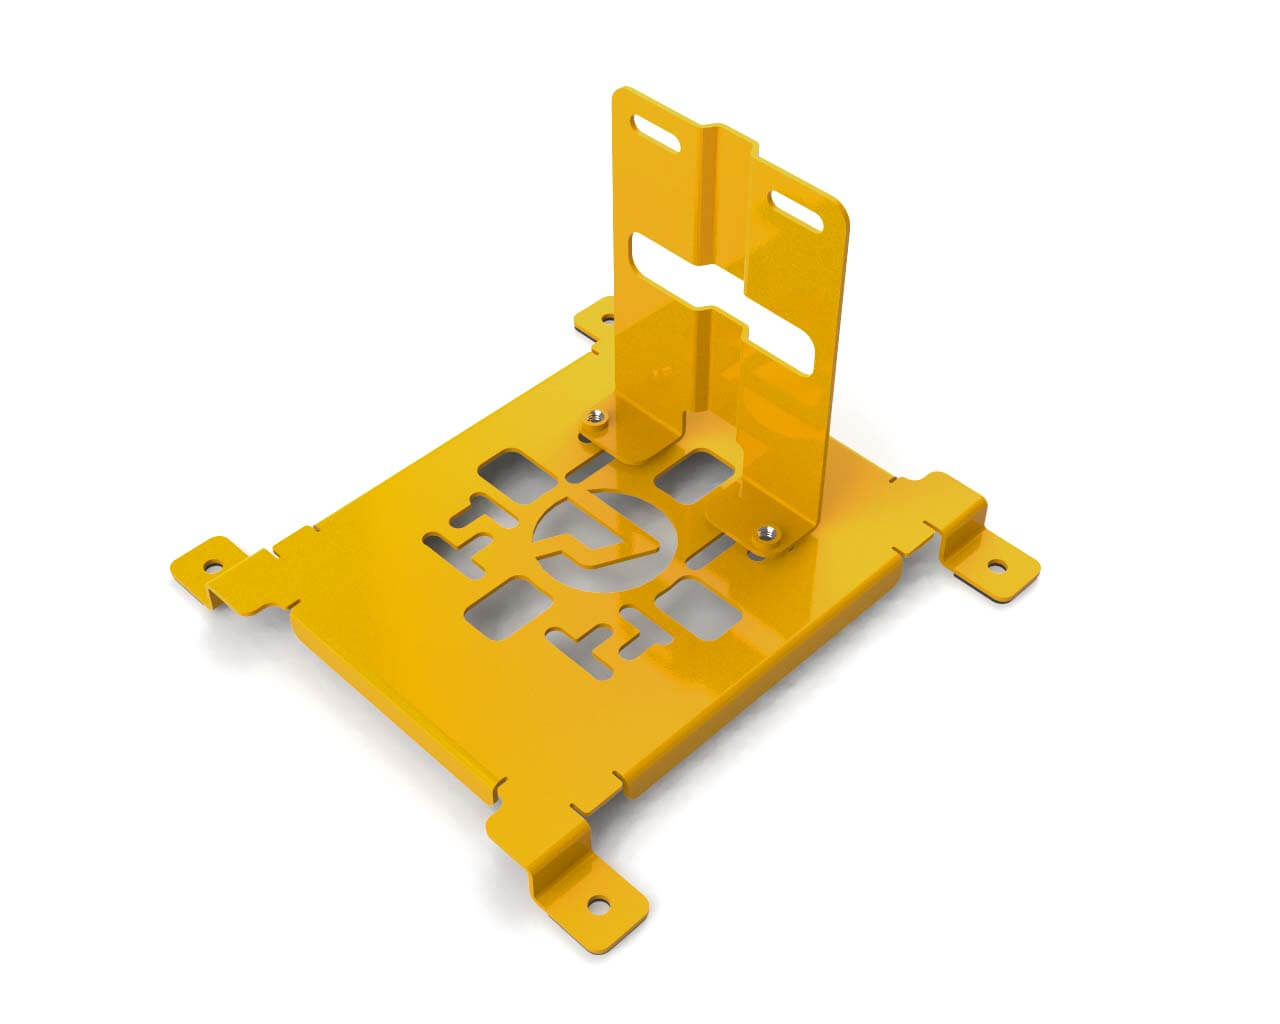 PrimoChill SX CTR2 Spider Mount Bracket Kit - 140mm Series - PrimoChill - KEEPING IT COOL Yellow